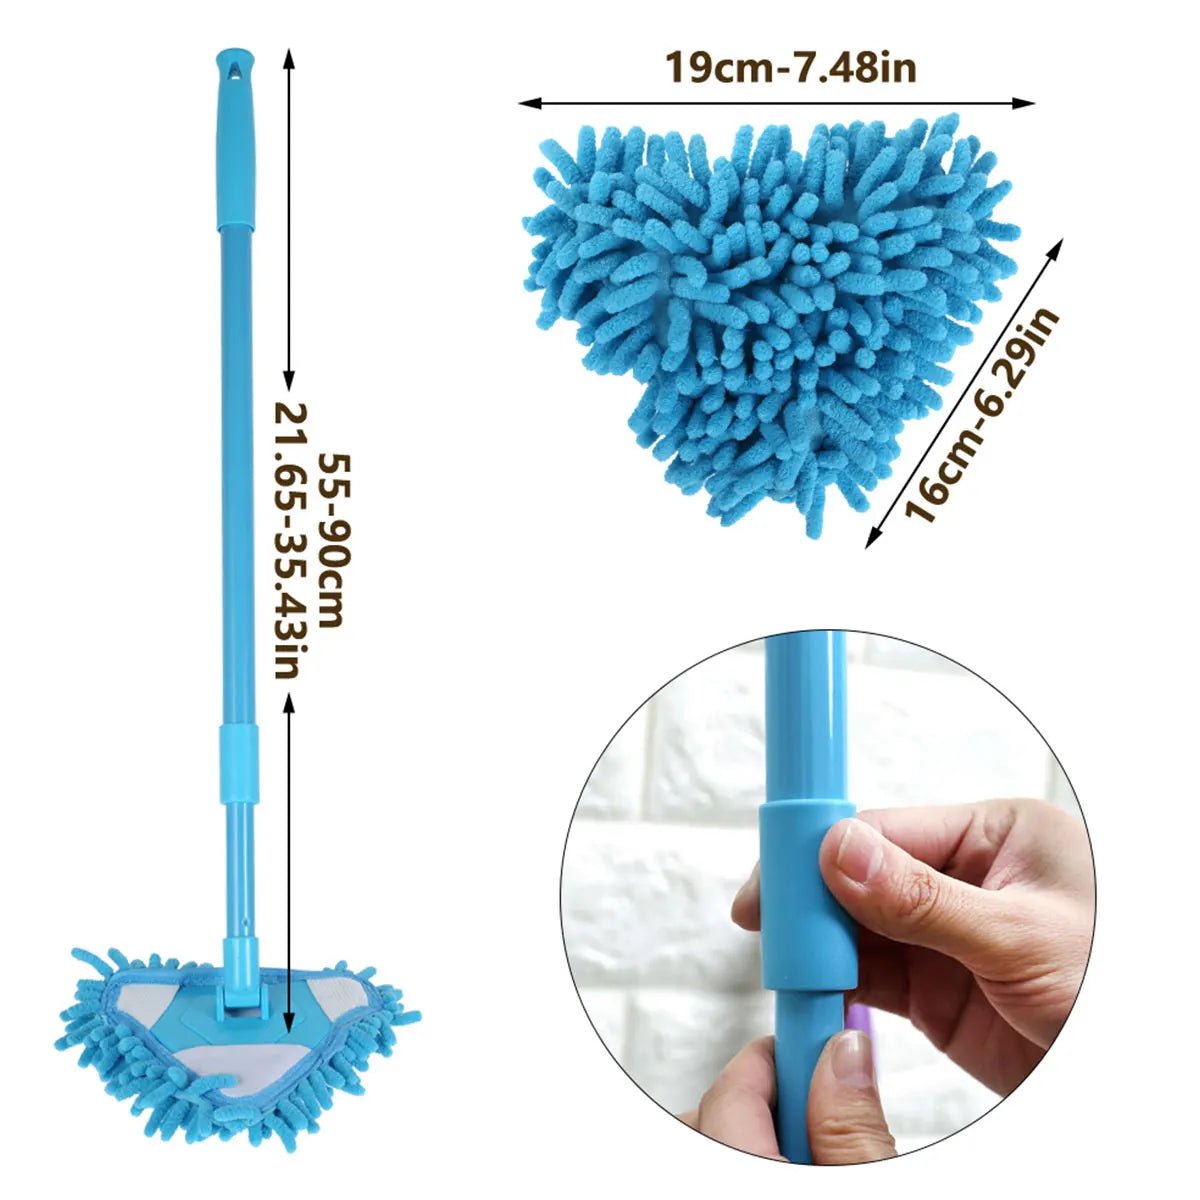 Adjustable Handle Cleaning Mop - Soft Chenille Broom for Washing, Window Wash, Dust Remover, Wax Brush